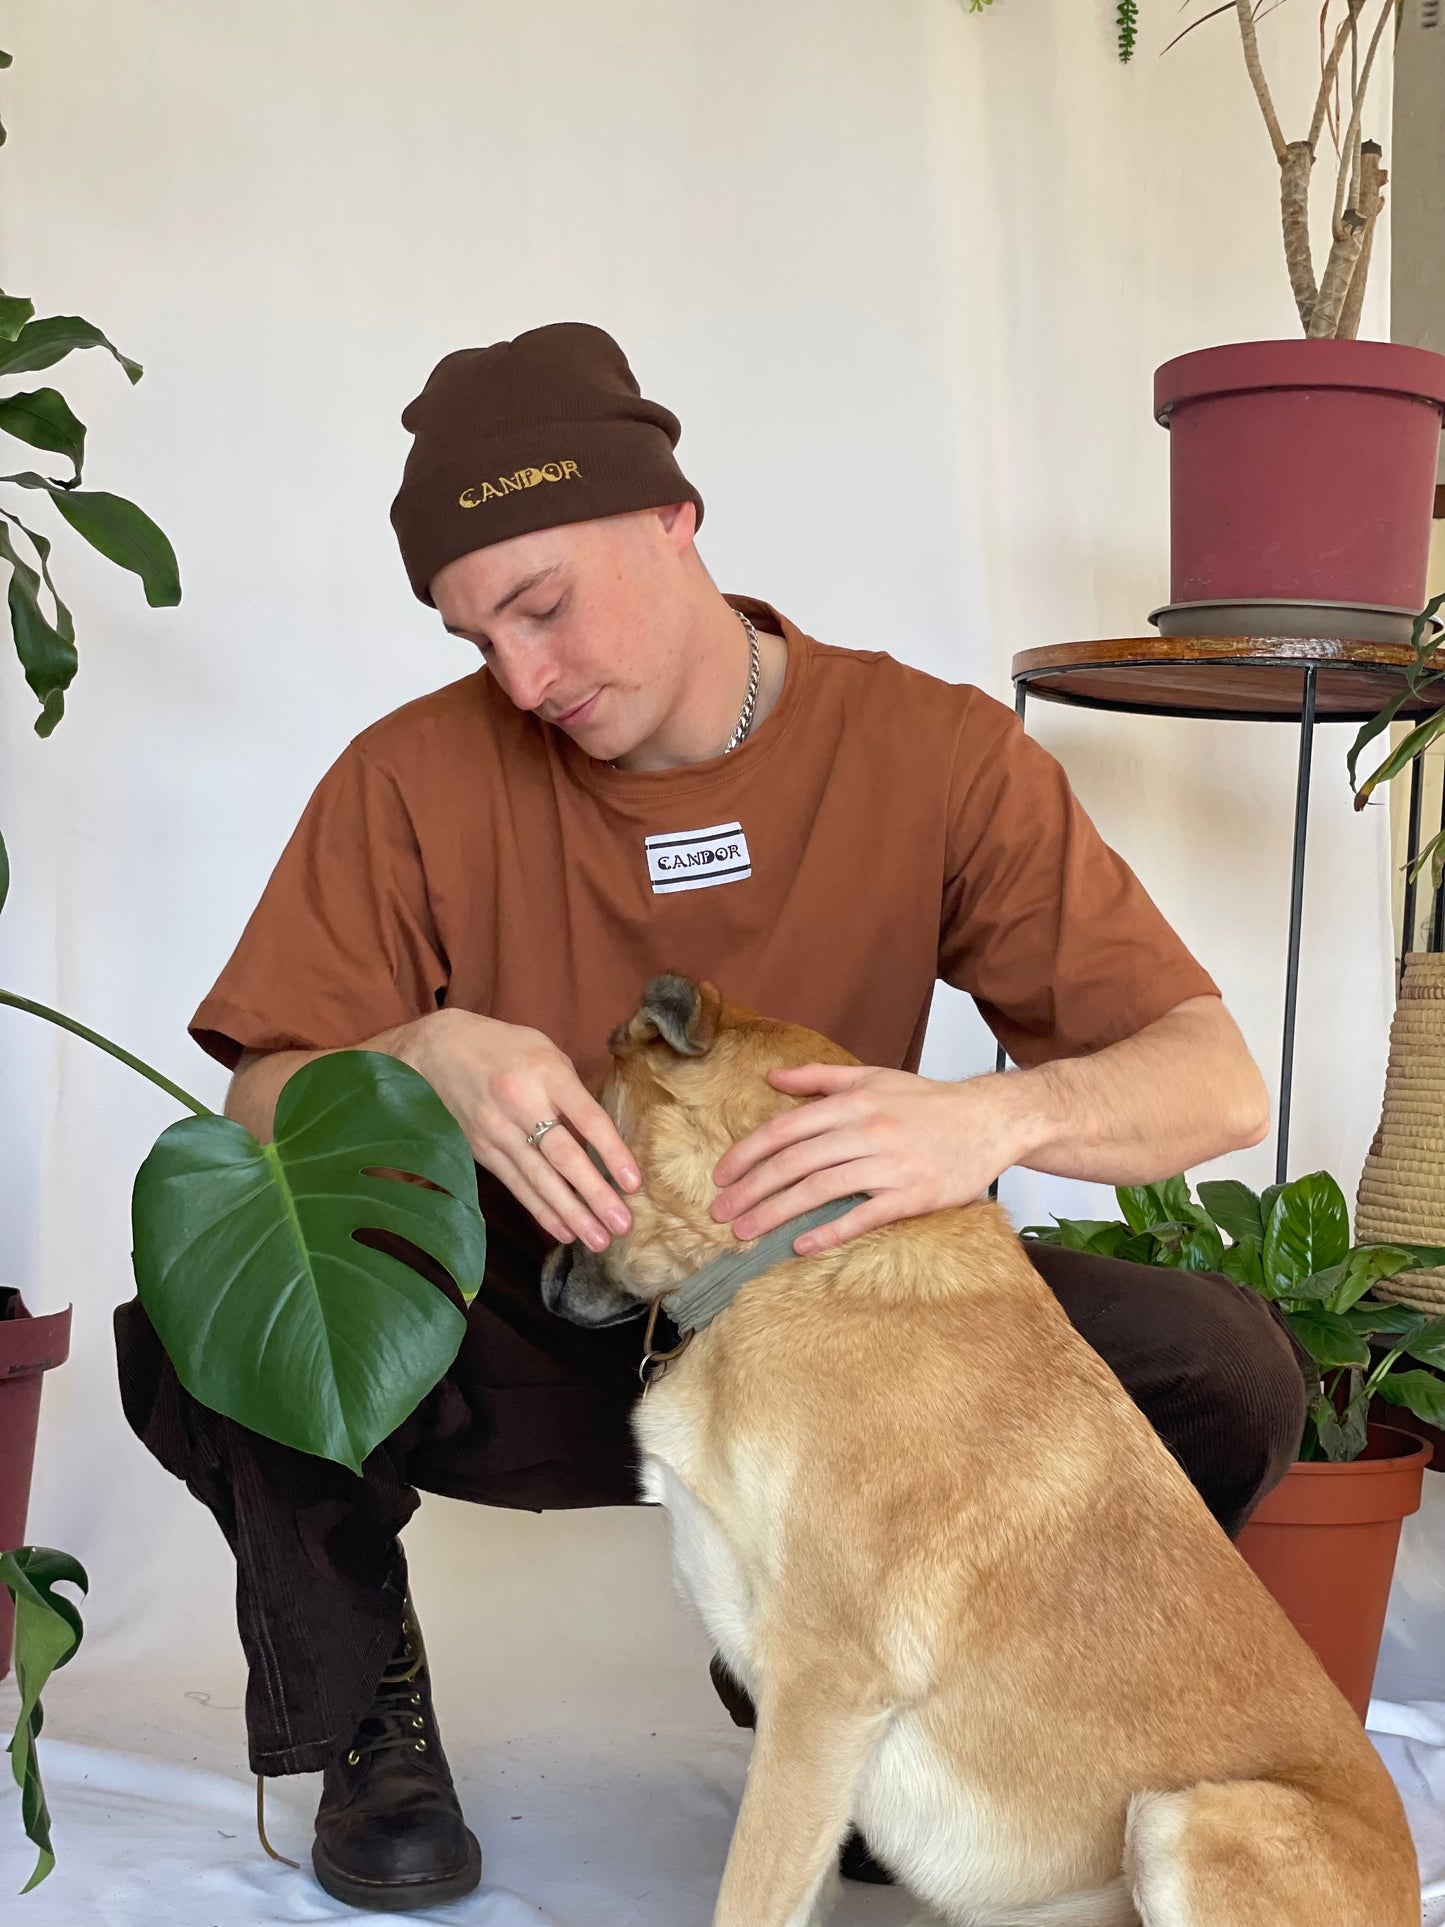 Models wears light brown t-shirt with Candor label, brown corduroy pants and brown beanie. Model stands crouched down rubbing a dog.